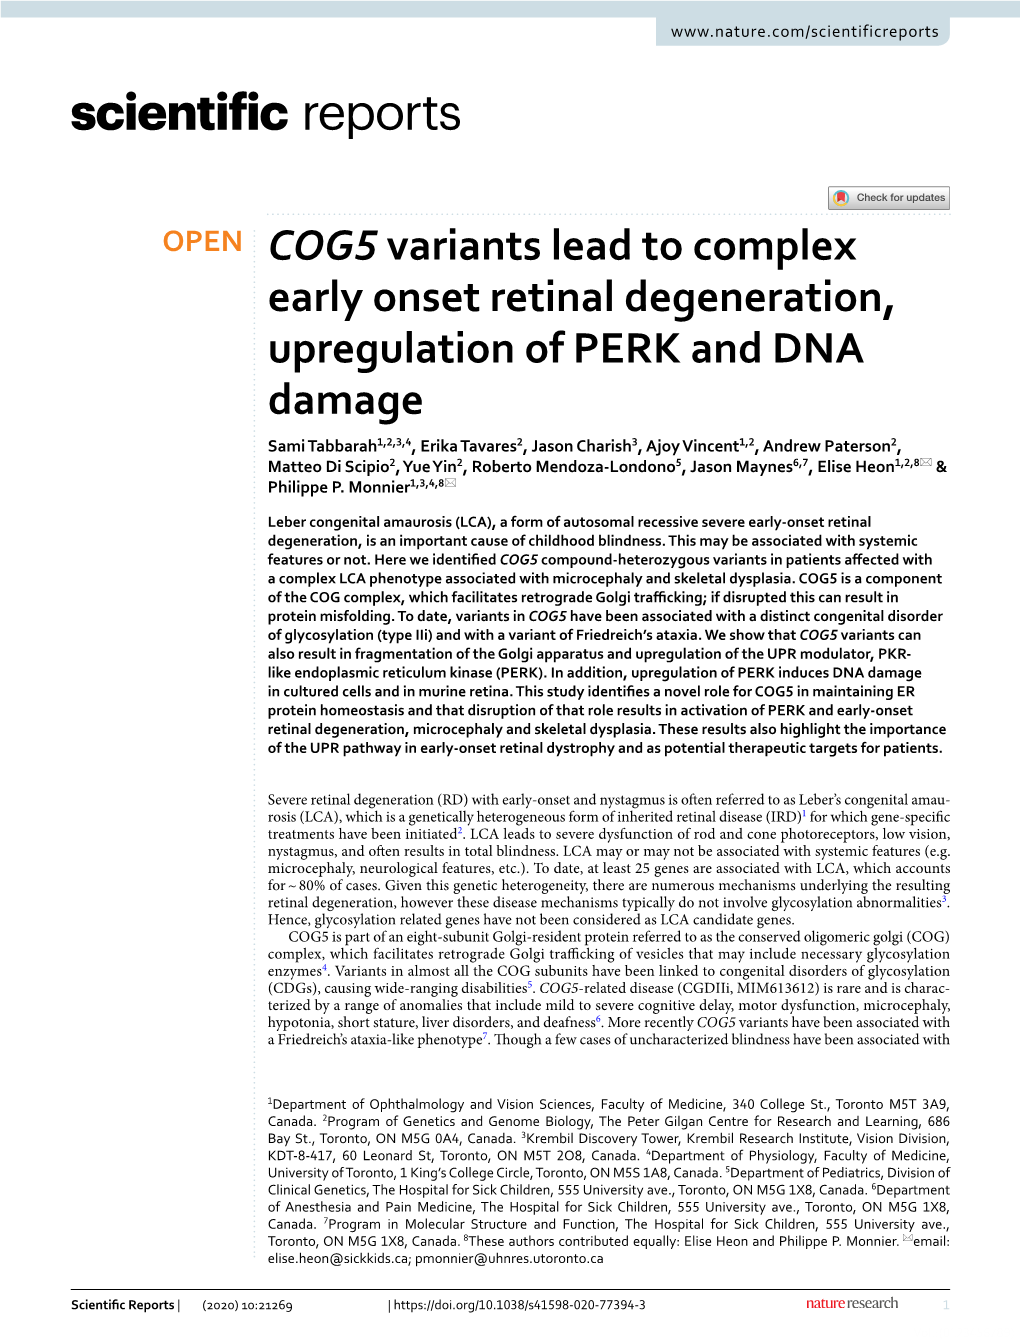 COG5 Variants Lead to Complex Early Onset Retinal Degeneration